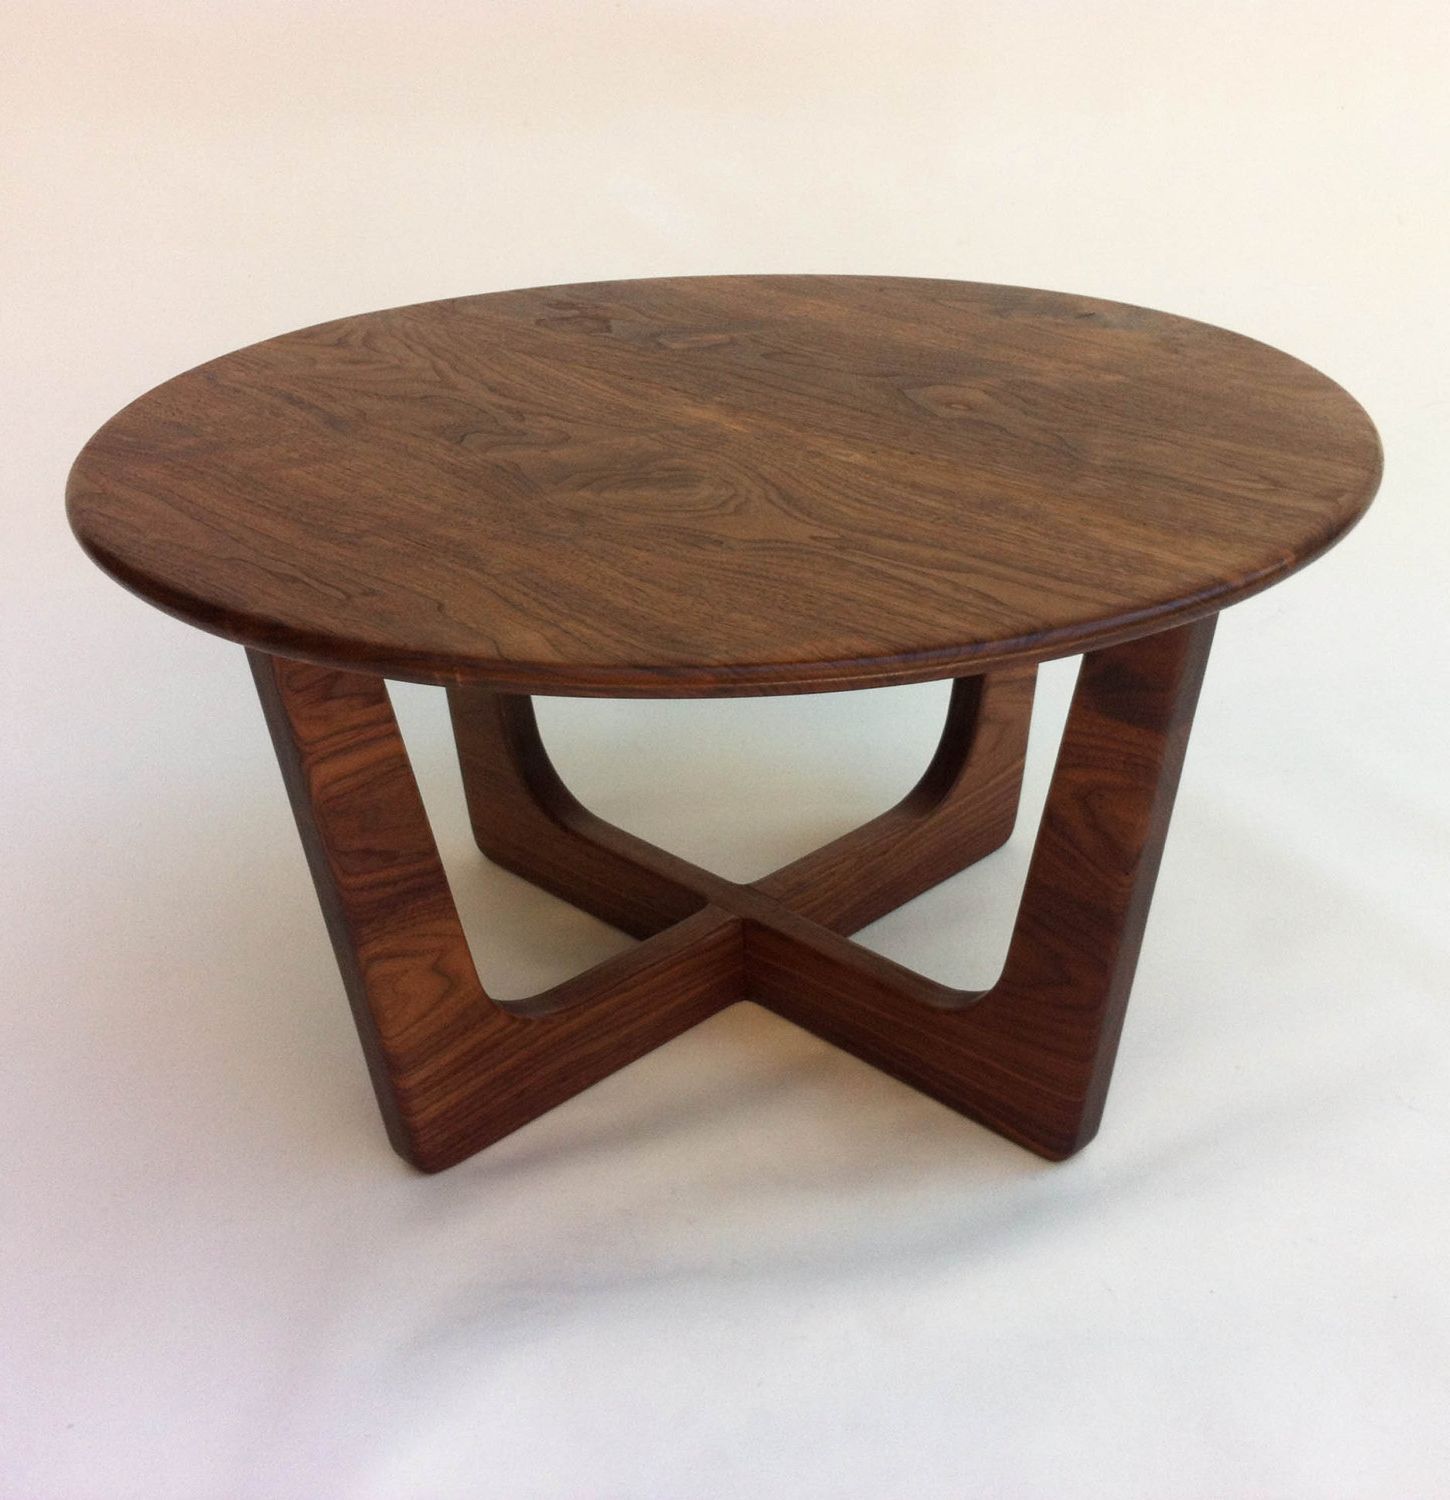 Mid Century Modern Coffee Tables In Current Solid Walnut Round Mid Century Modern Coffee Table (View 12 of 15)